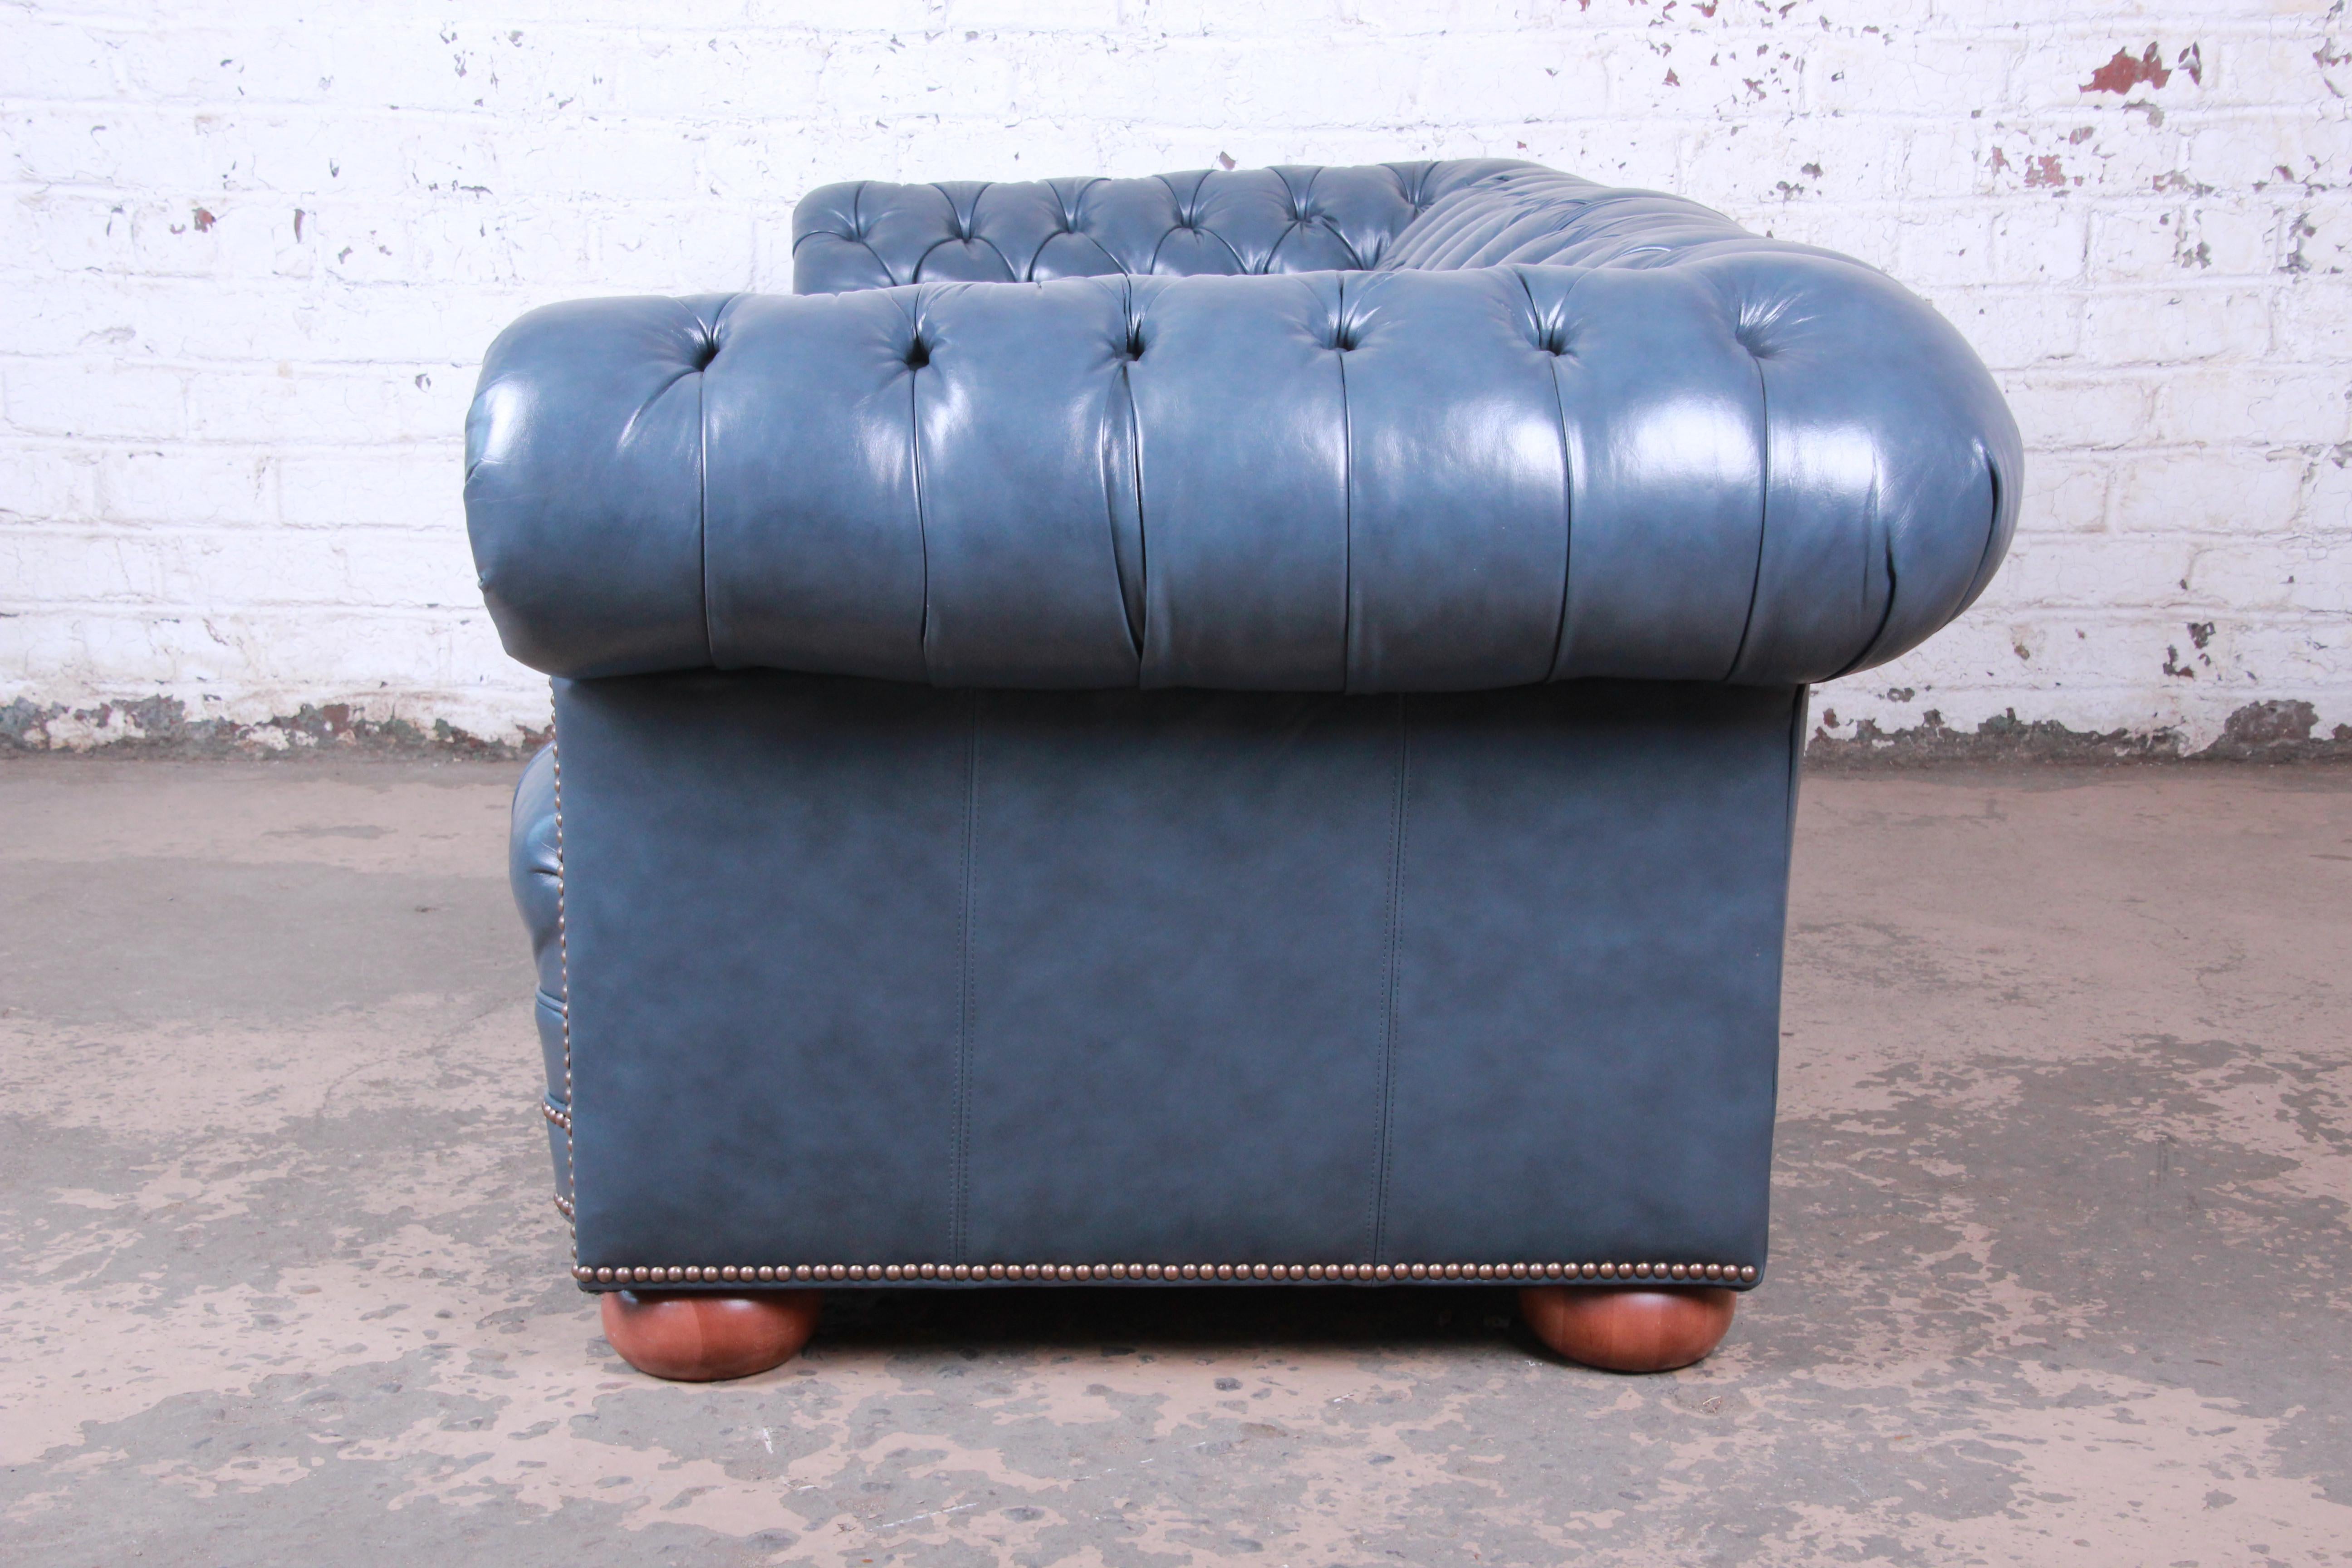 Brass Vintage Tufted Blue Leather Chesterfield Sofa